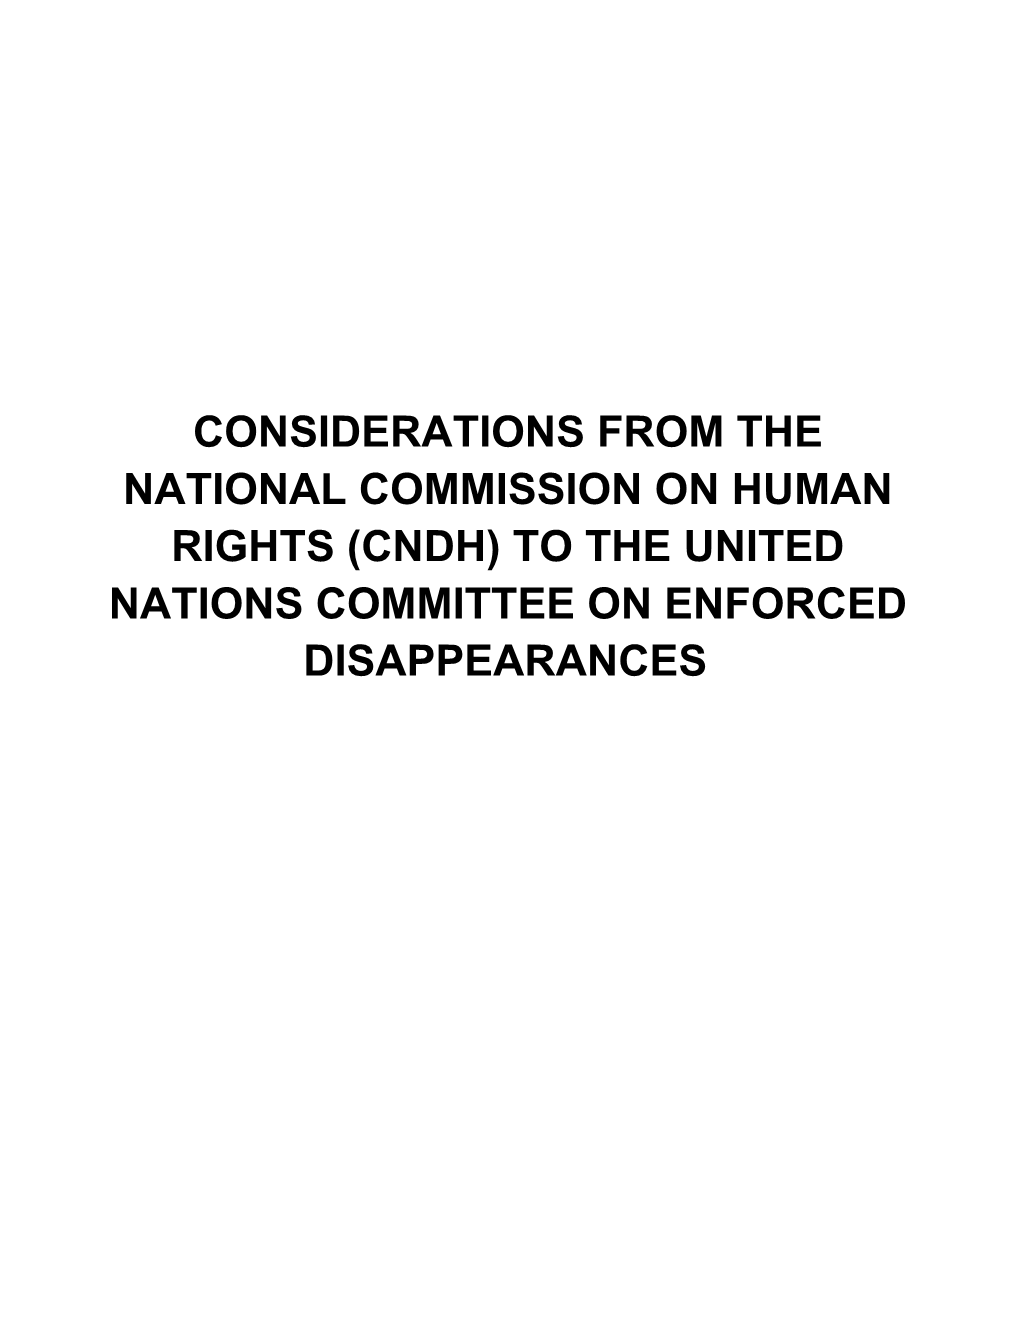 Considerations from the National Commission on Human